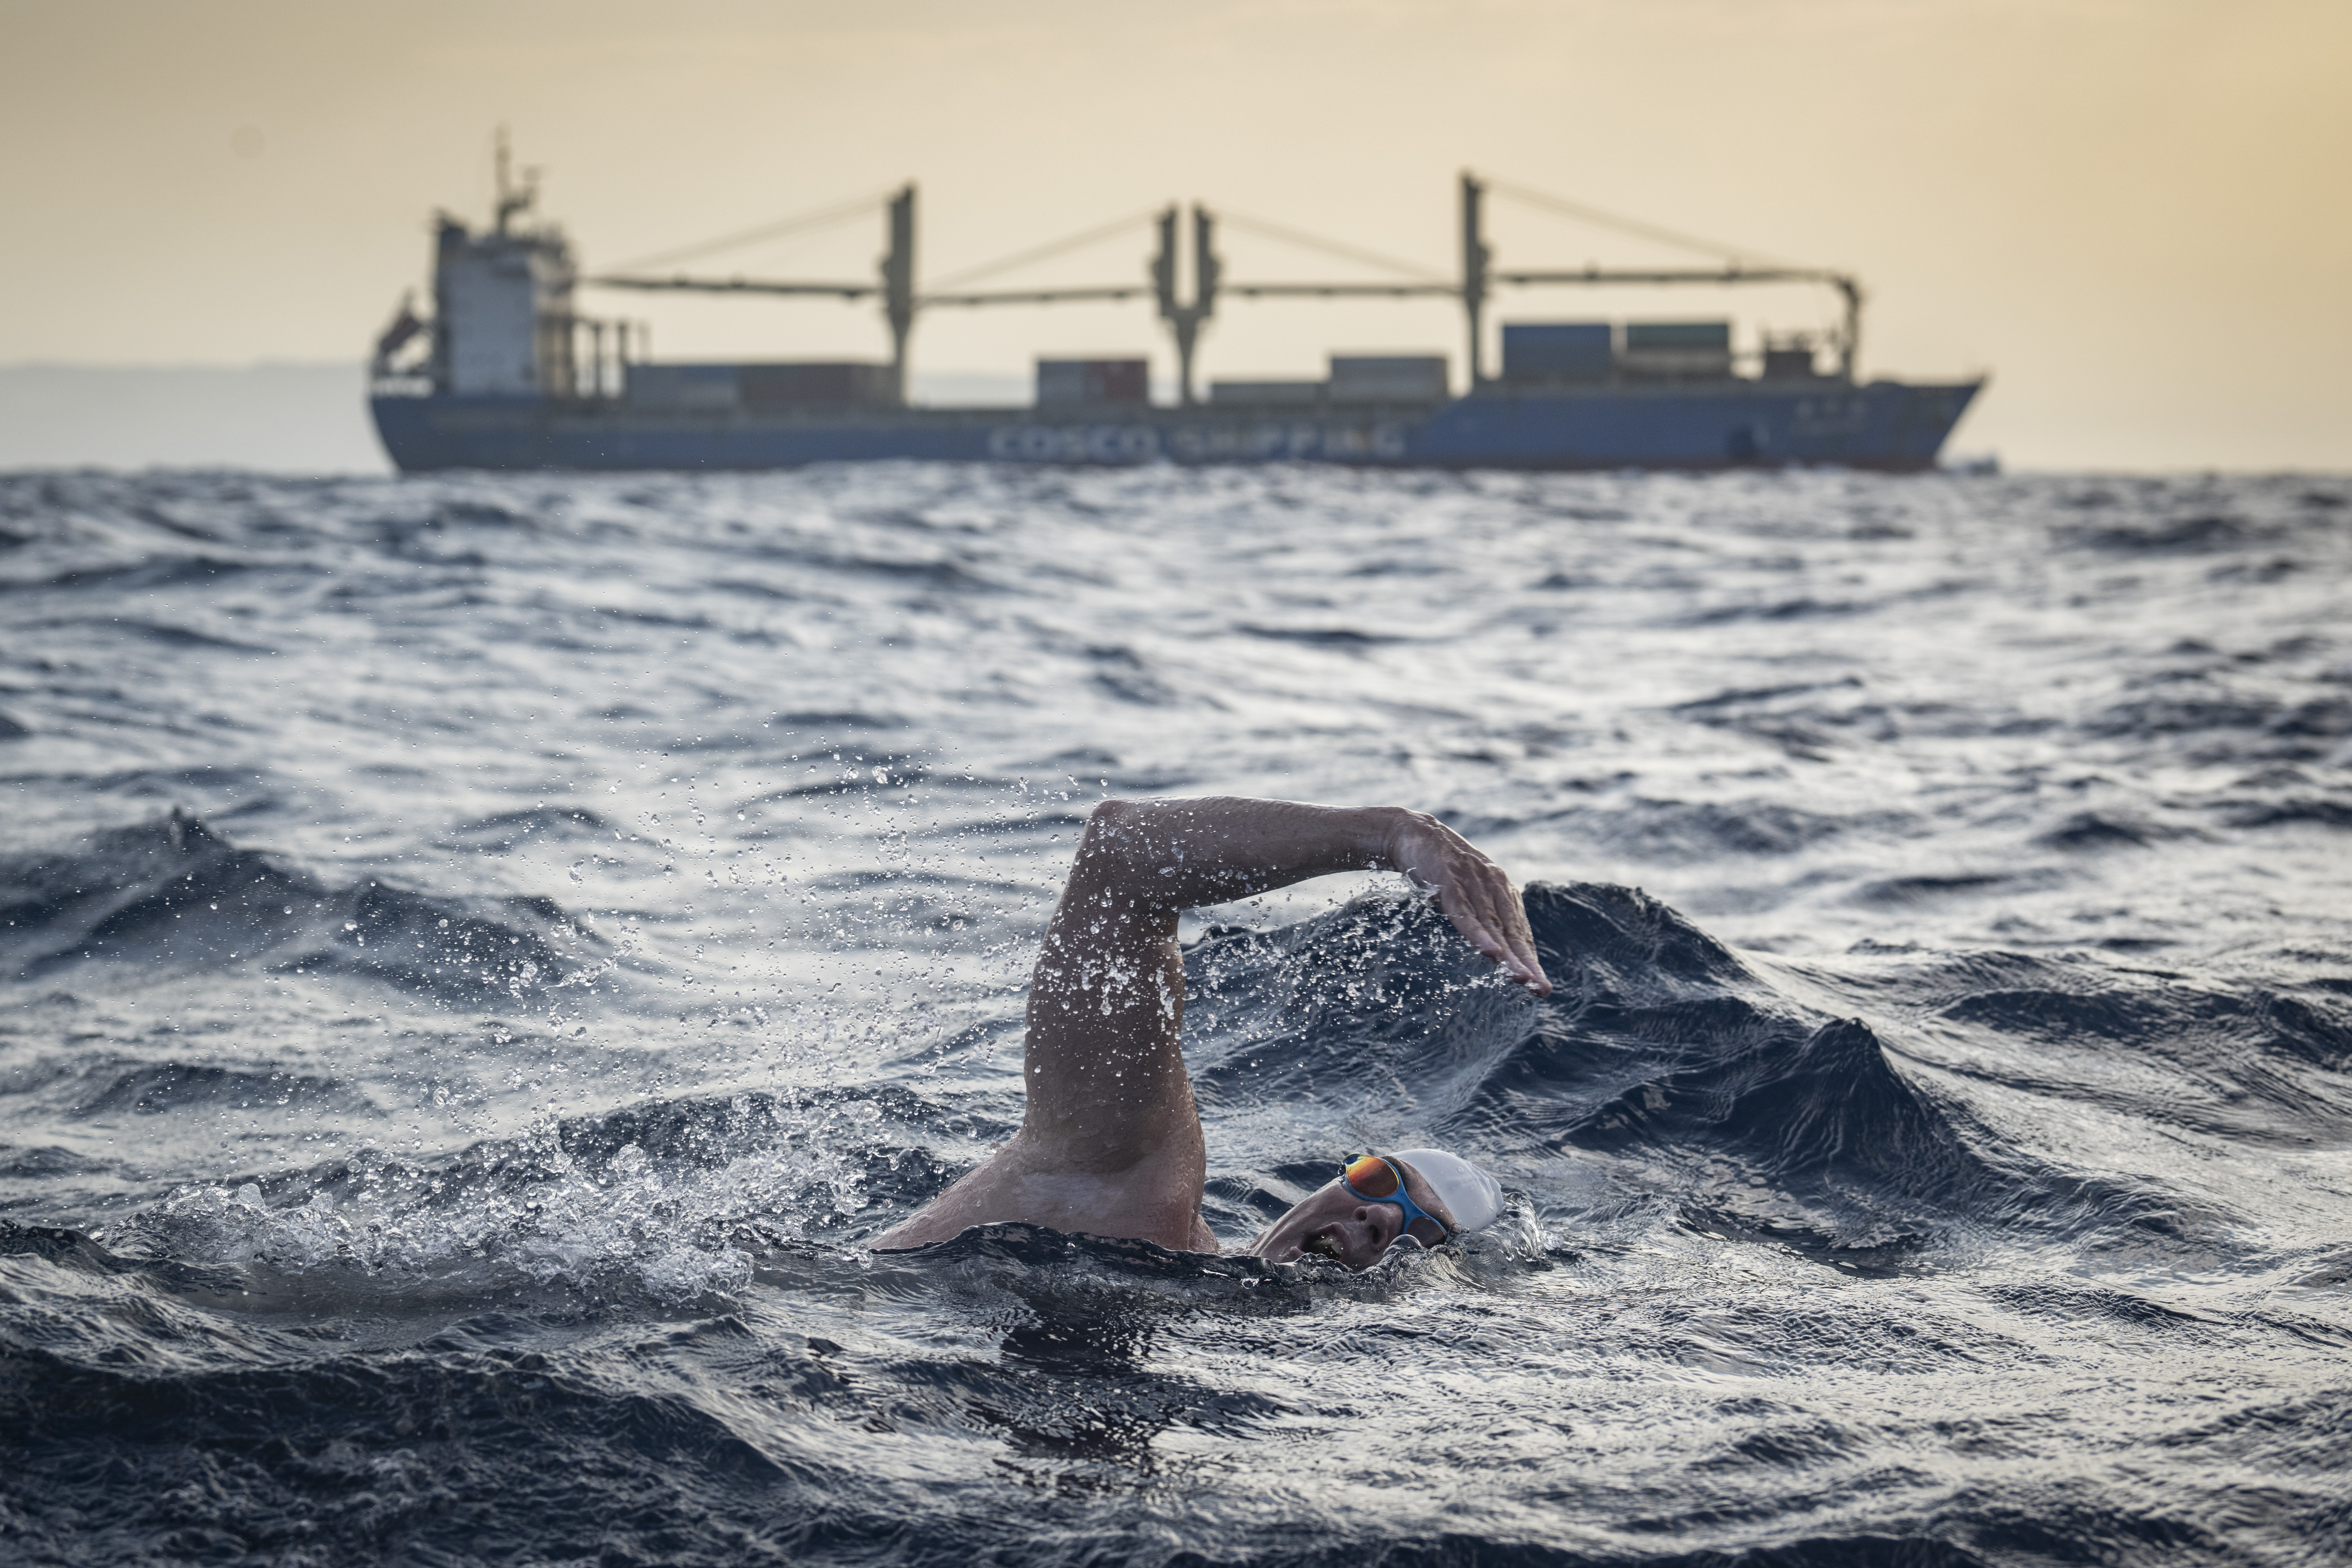 Lewis Pugh swimming with a shipping tanker in the background